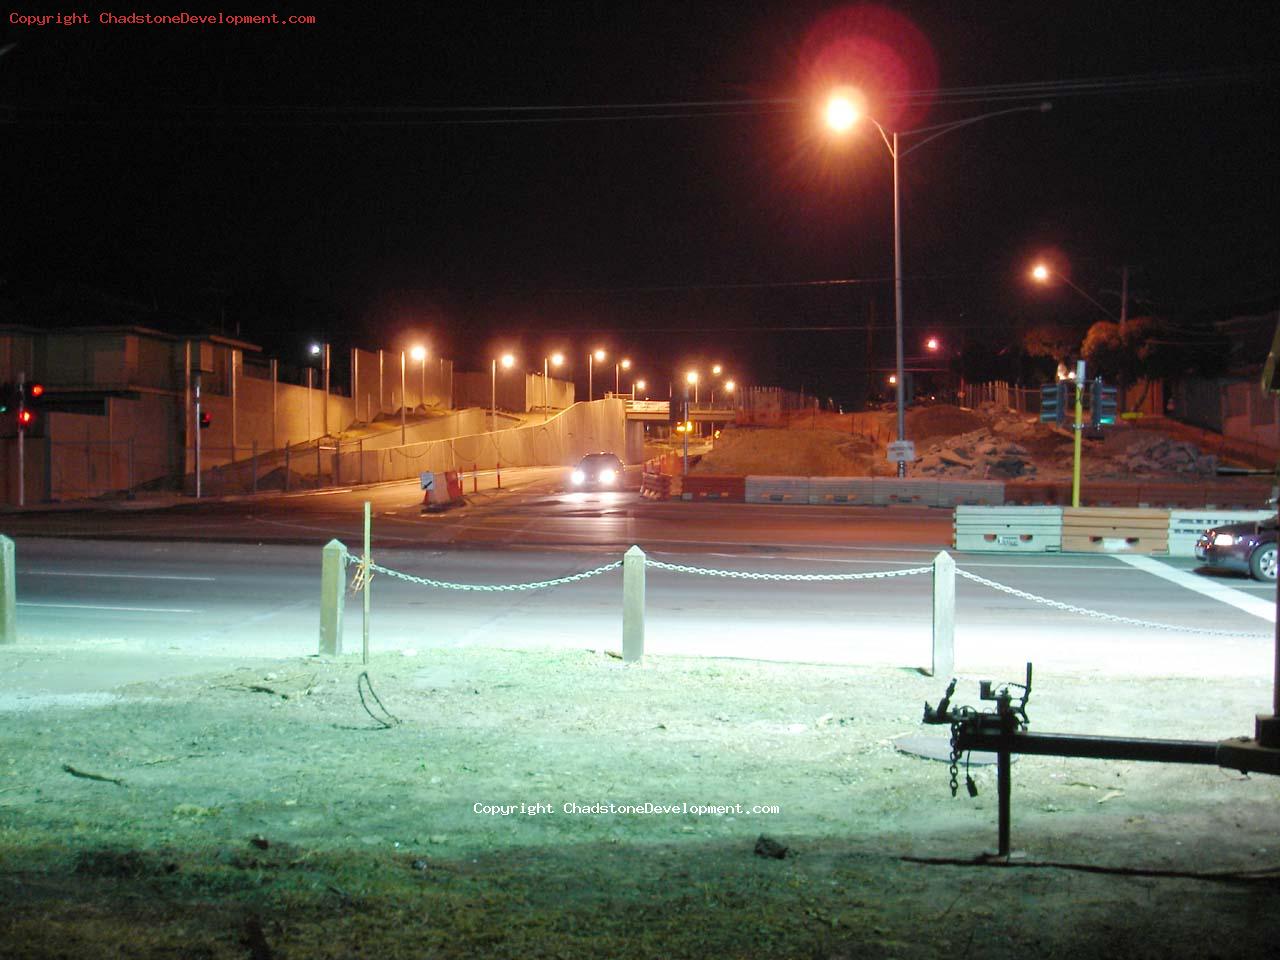 The intersection at night. New street lighting - Chadstone Development Discussions Gallery